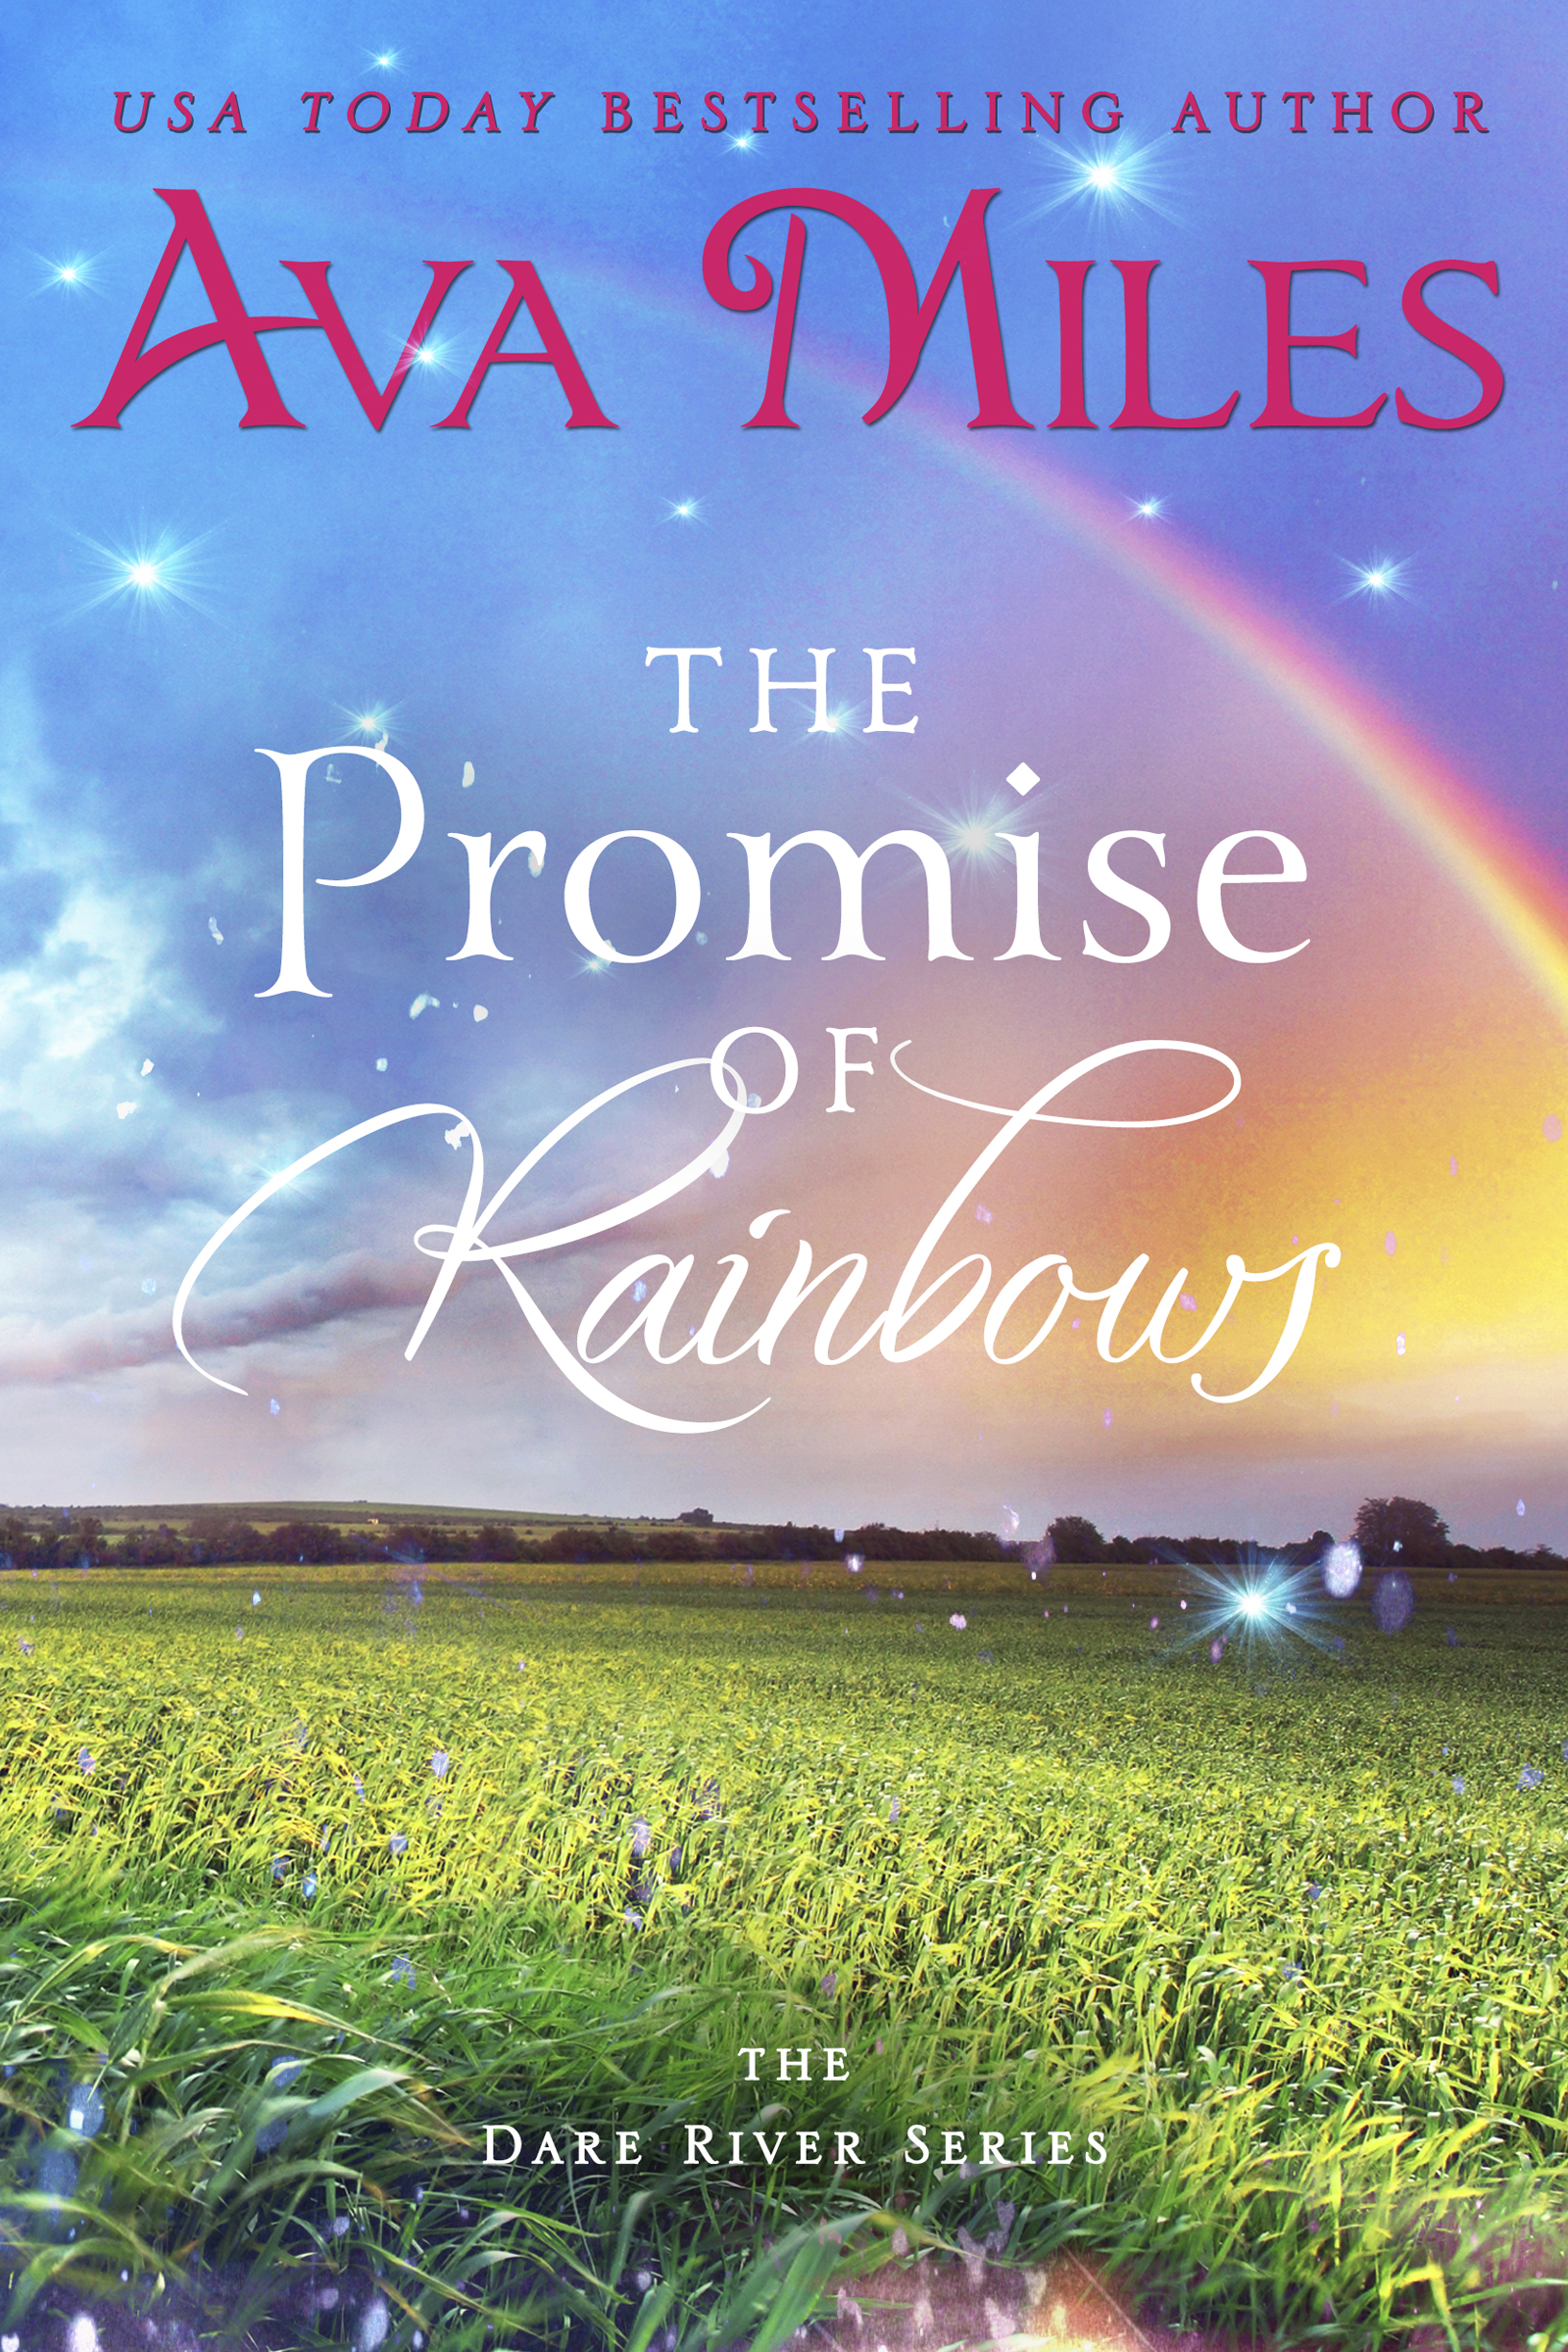 The Promise of Rainbows (2016) by Ava Miles